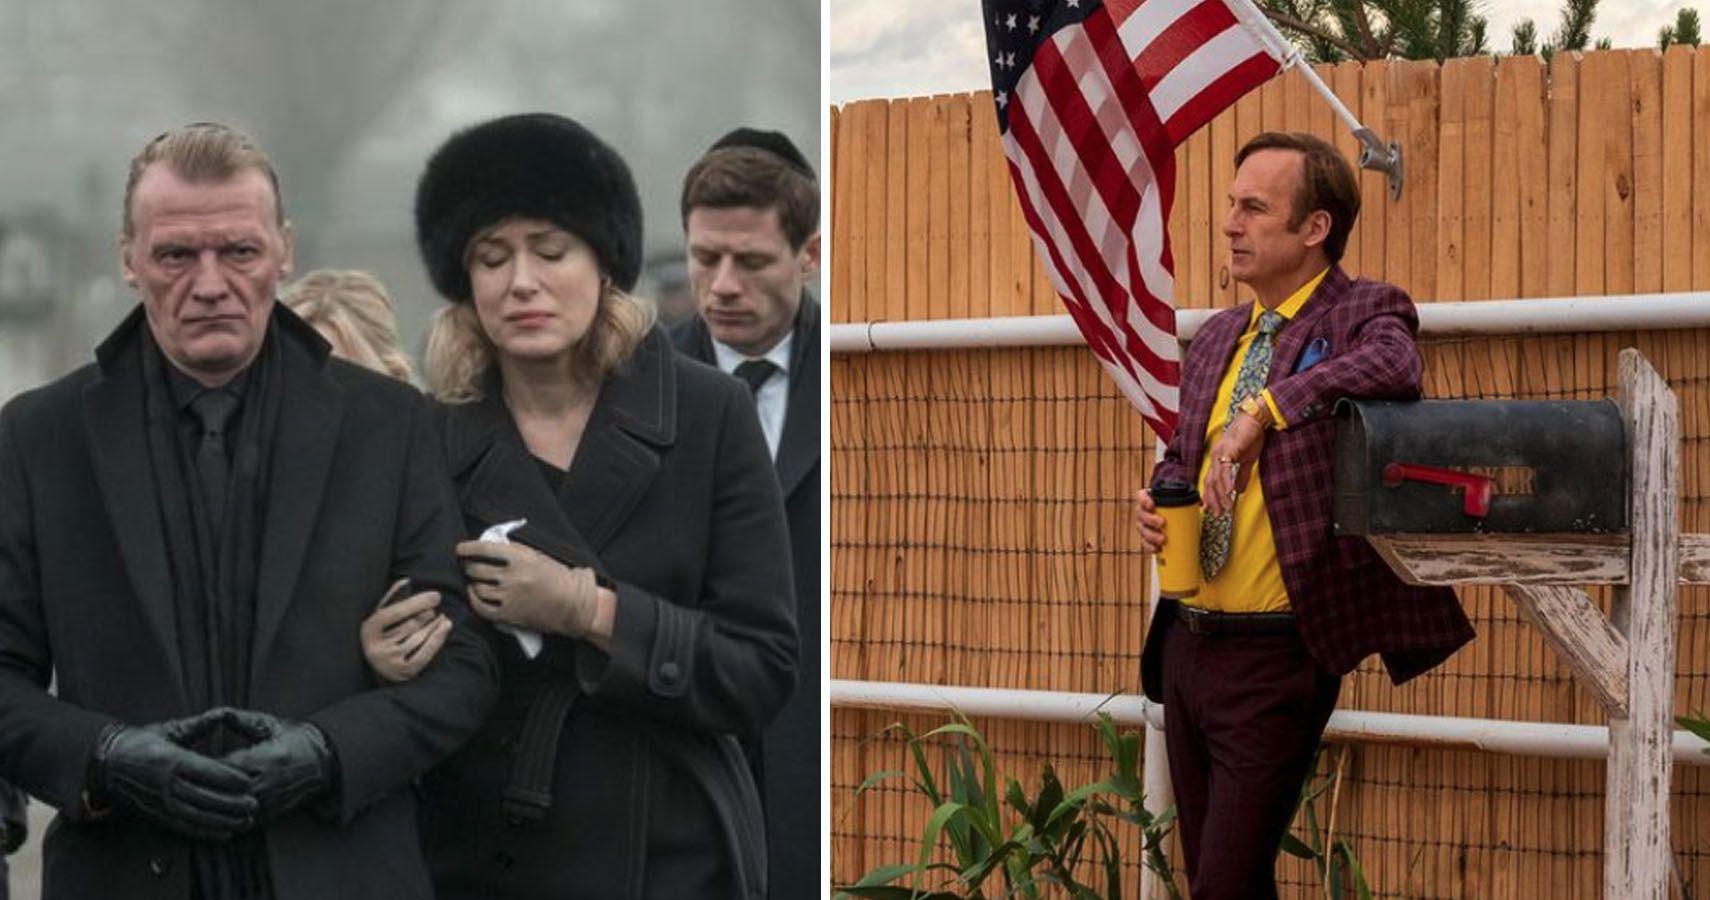 AMCs 15 Best TV Shows Currently On The Air Ranked